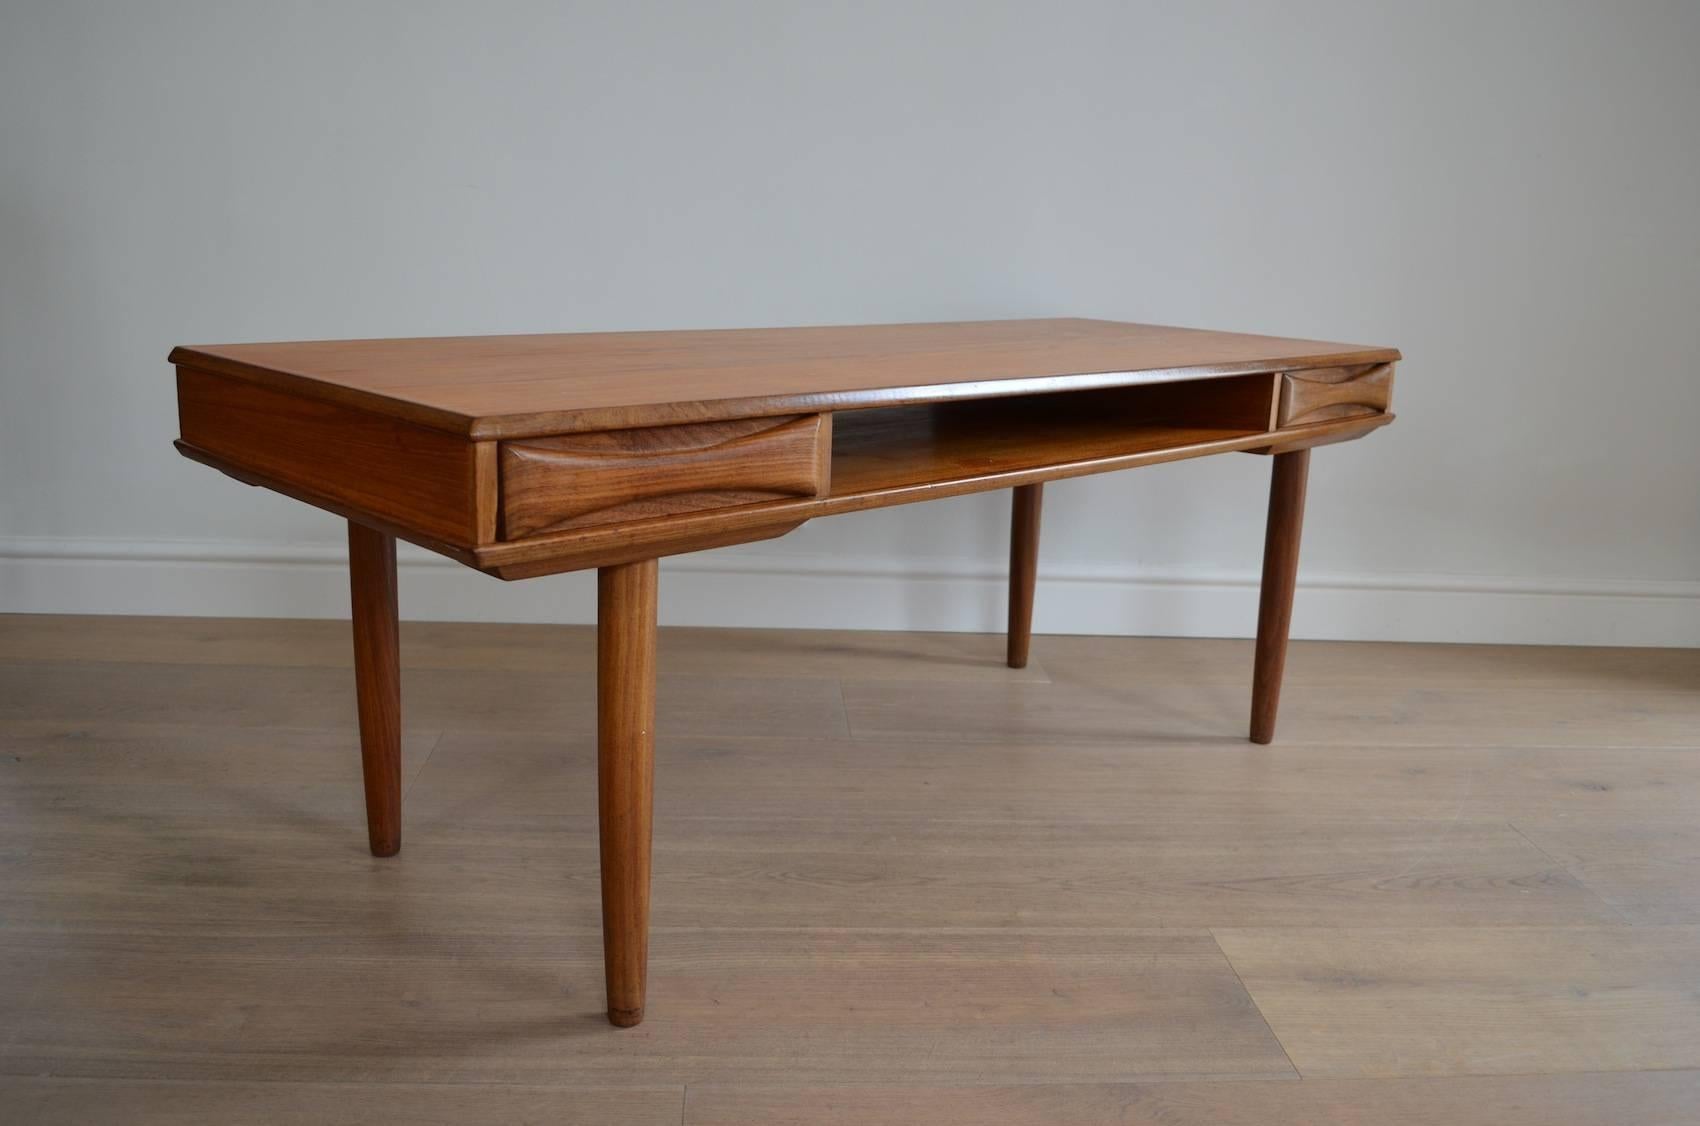 A Danish 1950s Arne Vodder style teak coffee table with a central bookshelf and sculptural double-sided drawers to each end.

Excellent original condition.